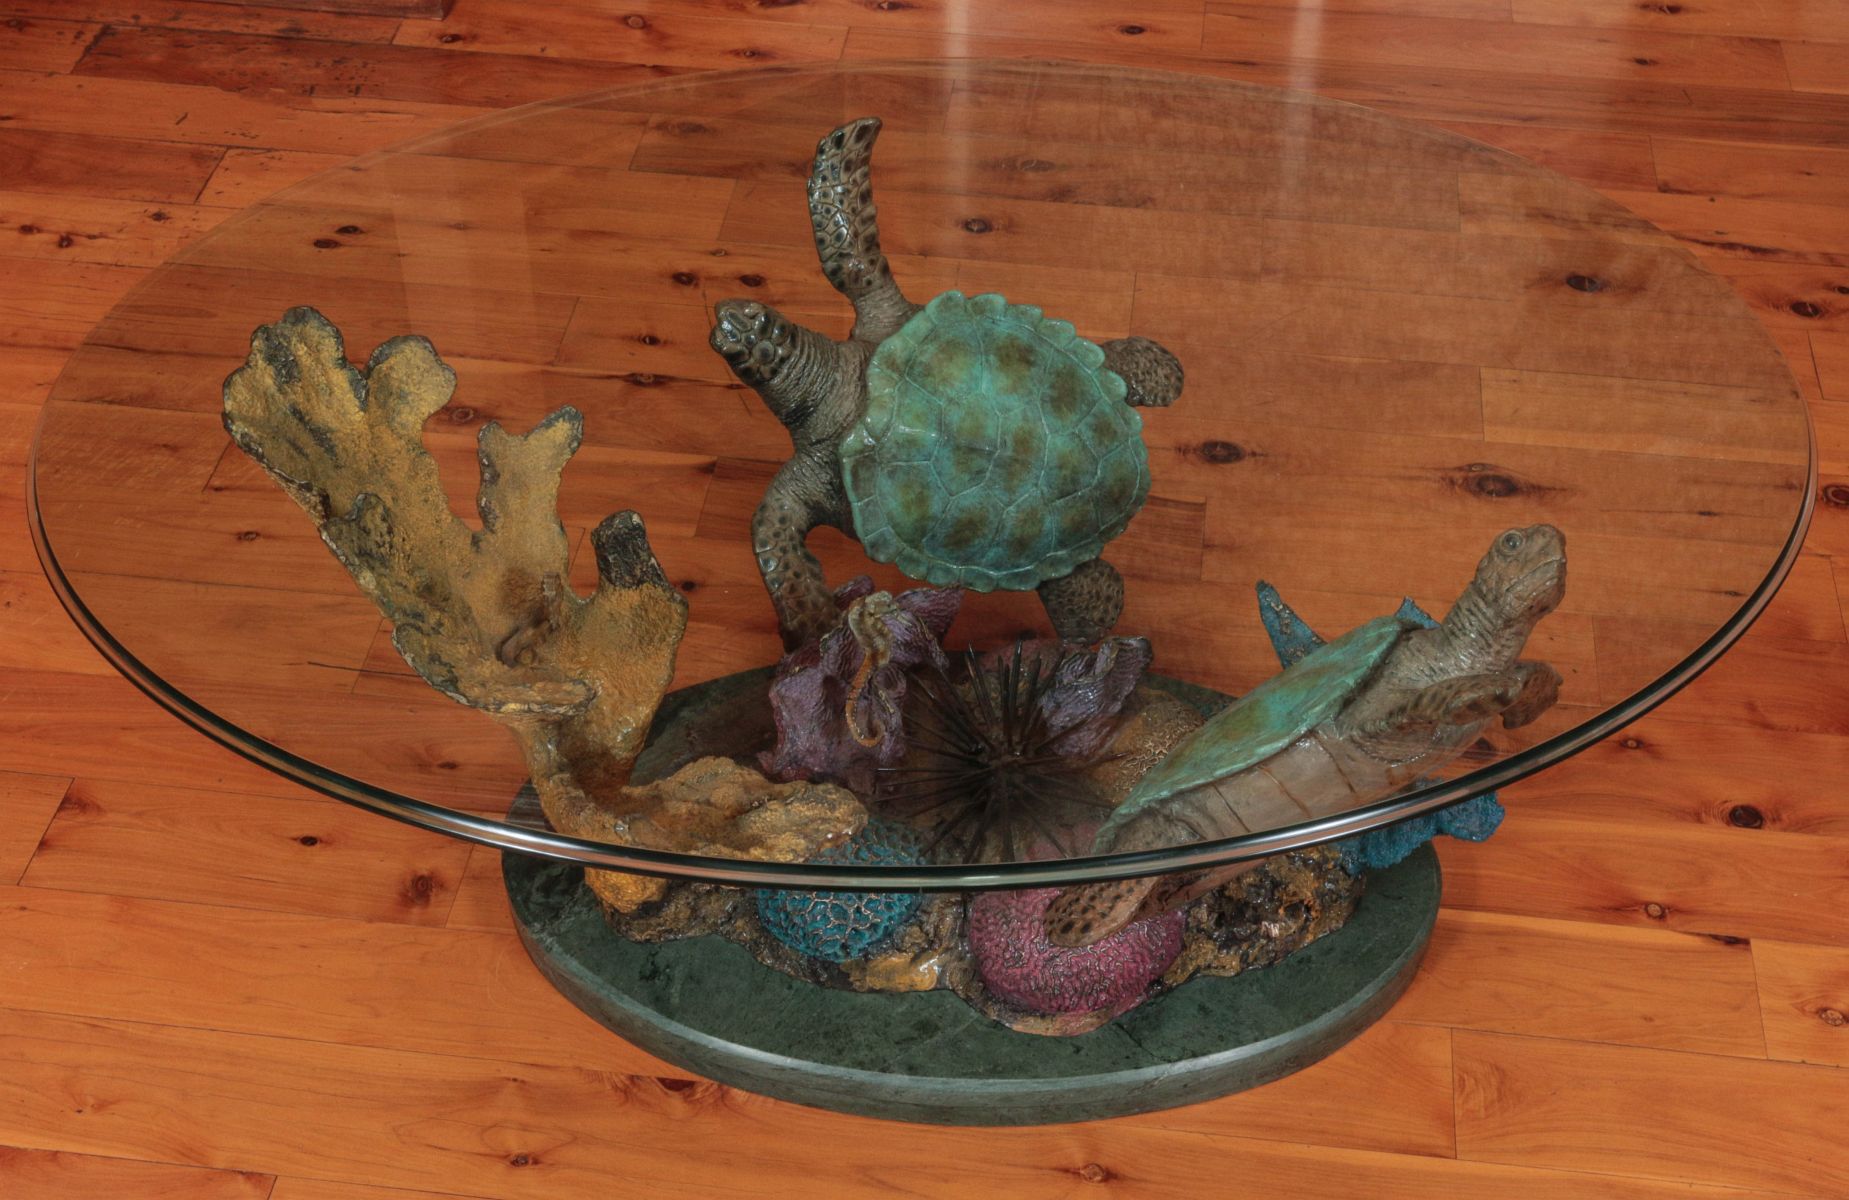 A NICE ENAMELED BRONZE TABLE BASE WITH SEA TURTLES